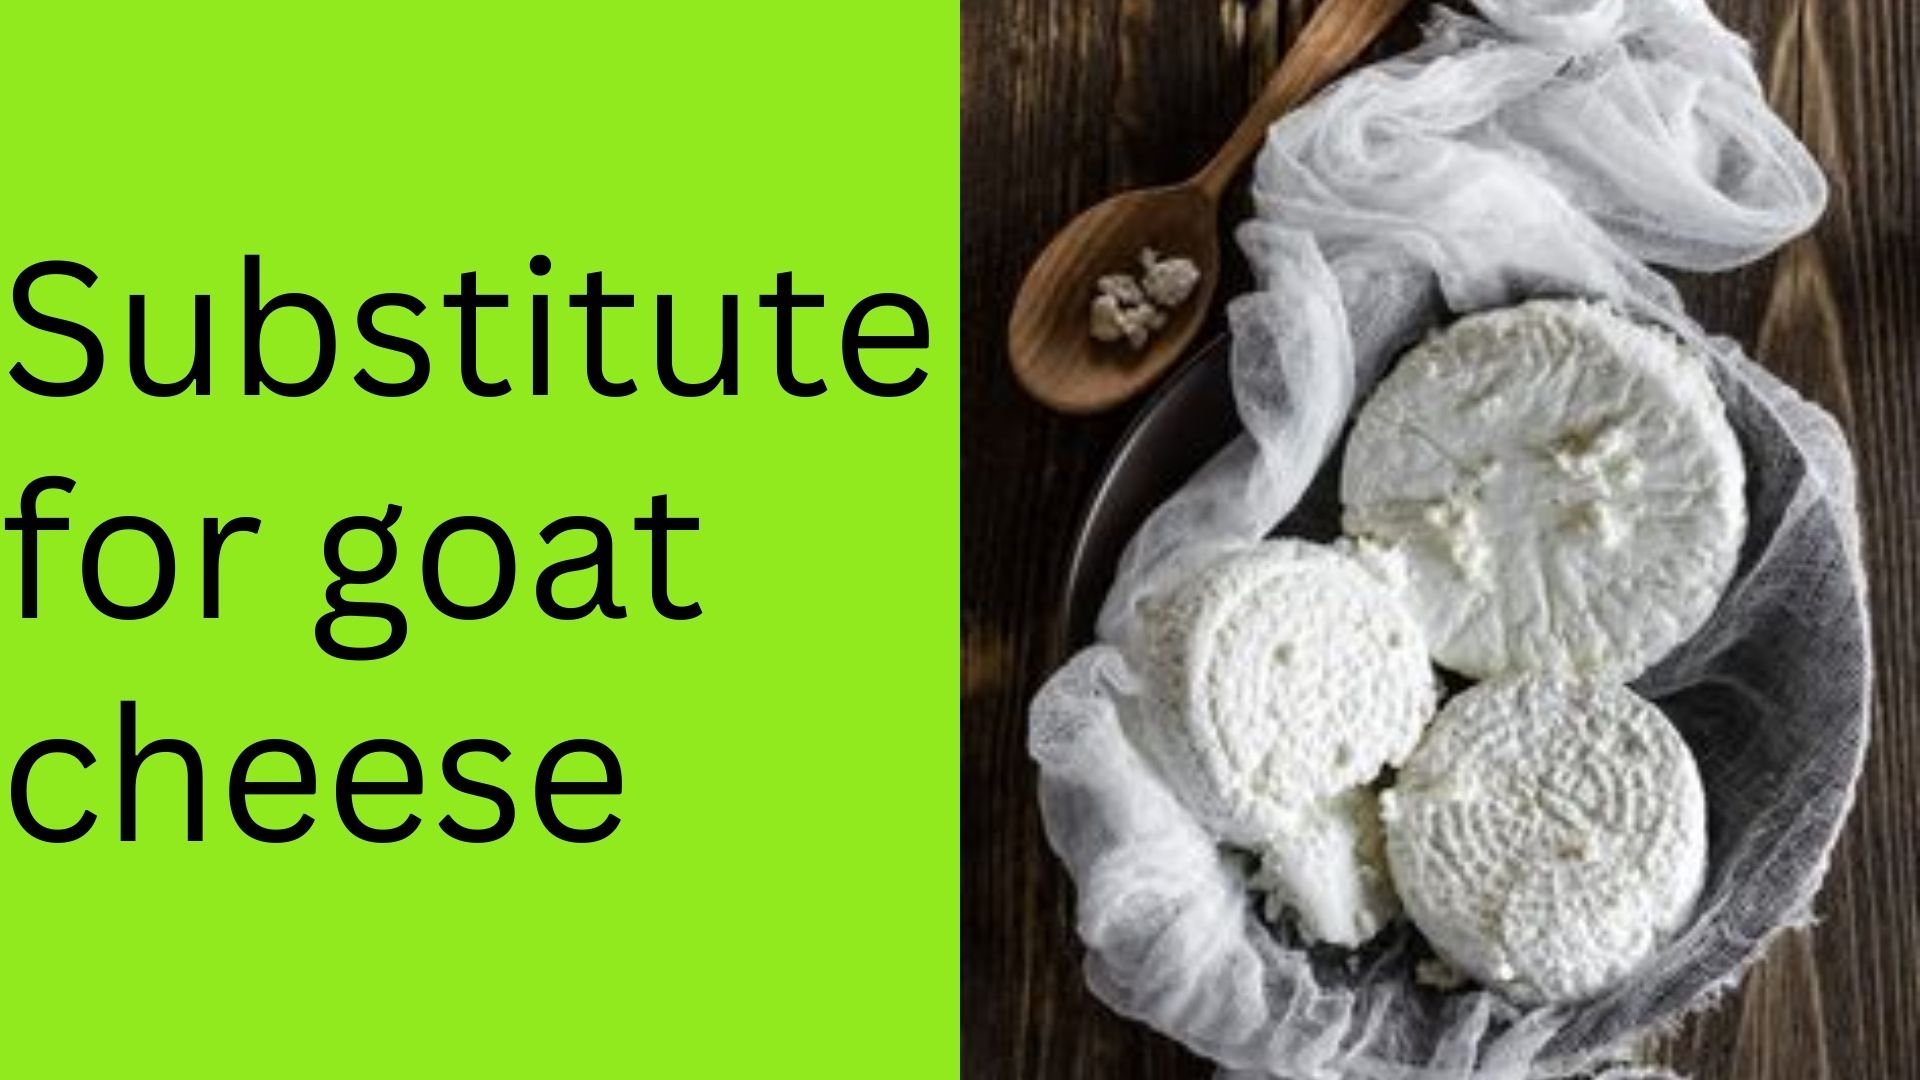 Substitute for goat cheese